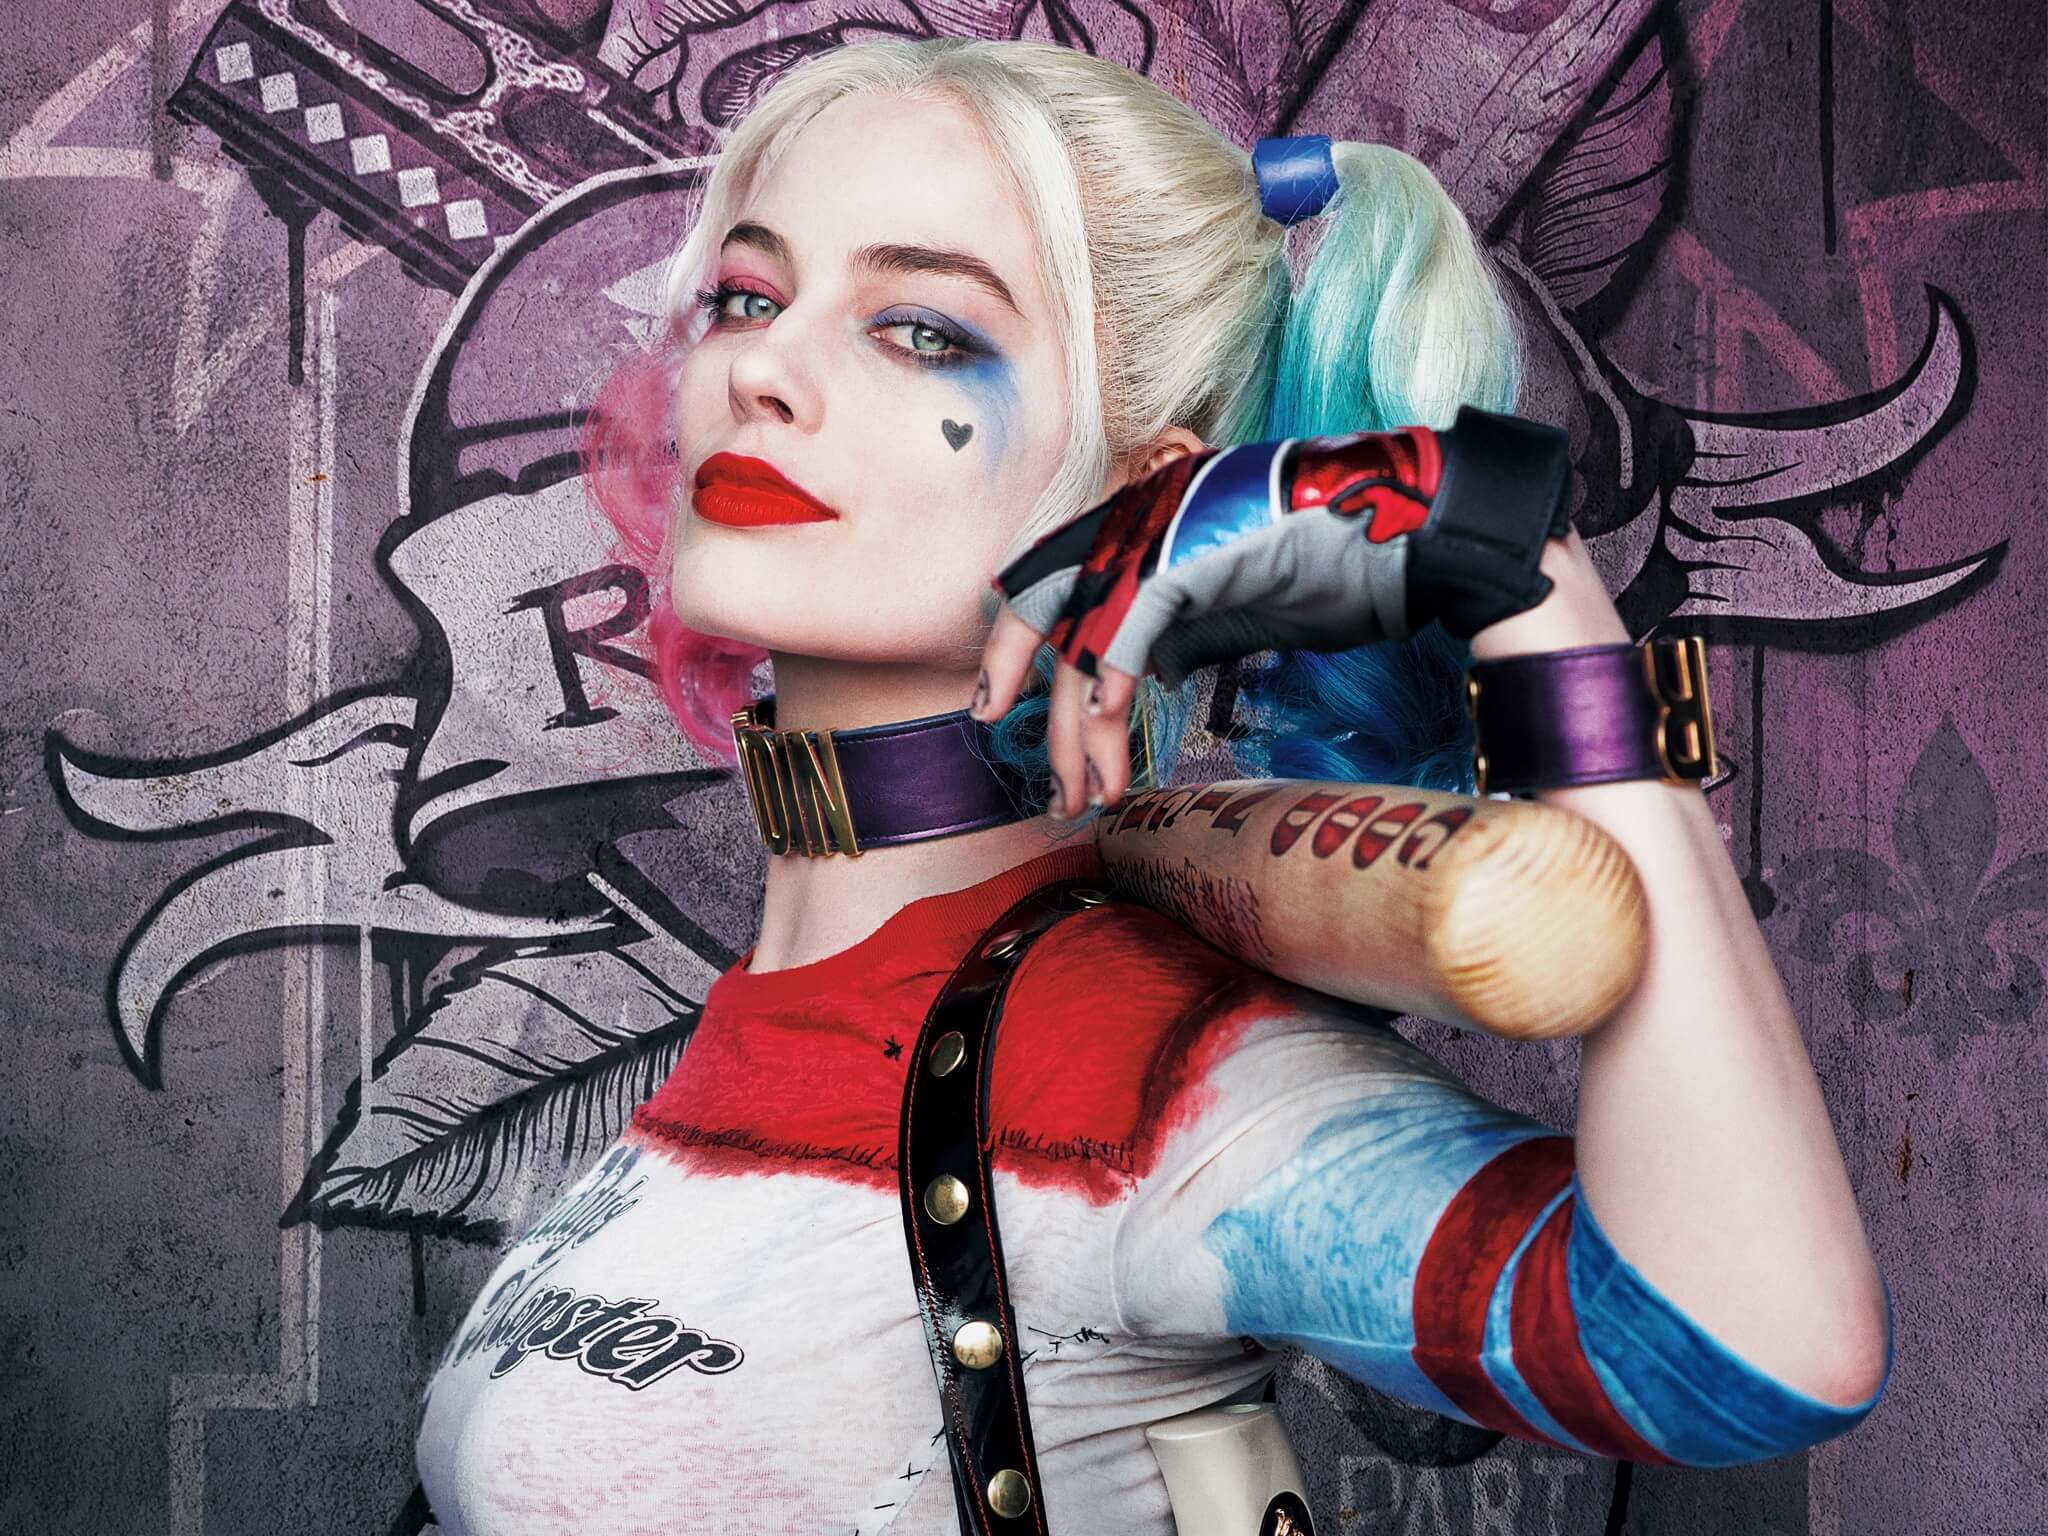 49 Hottest Harley Quinn Bikini Pictures Will Rock Your World | Best Of Comic Books